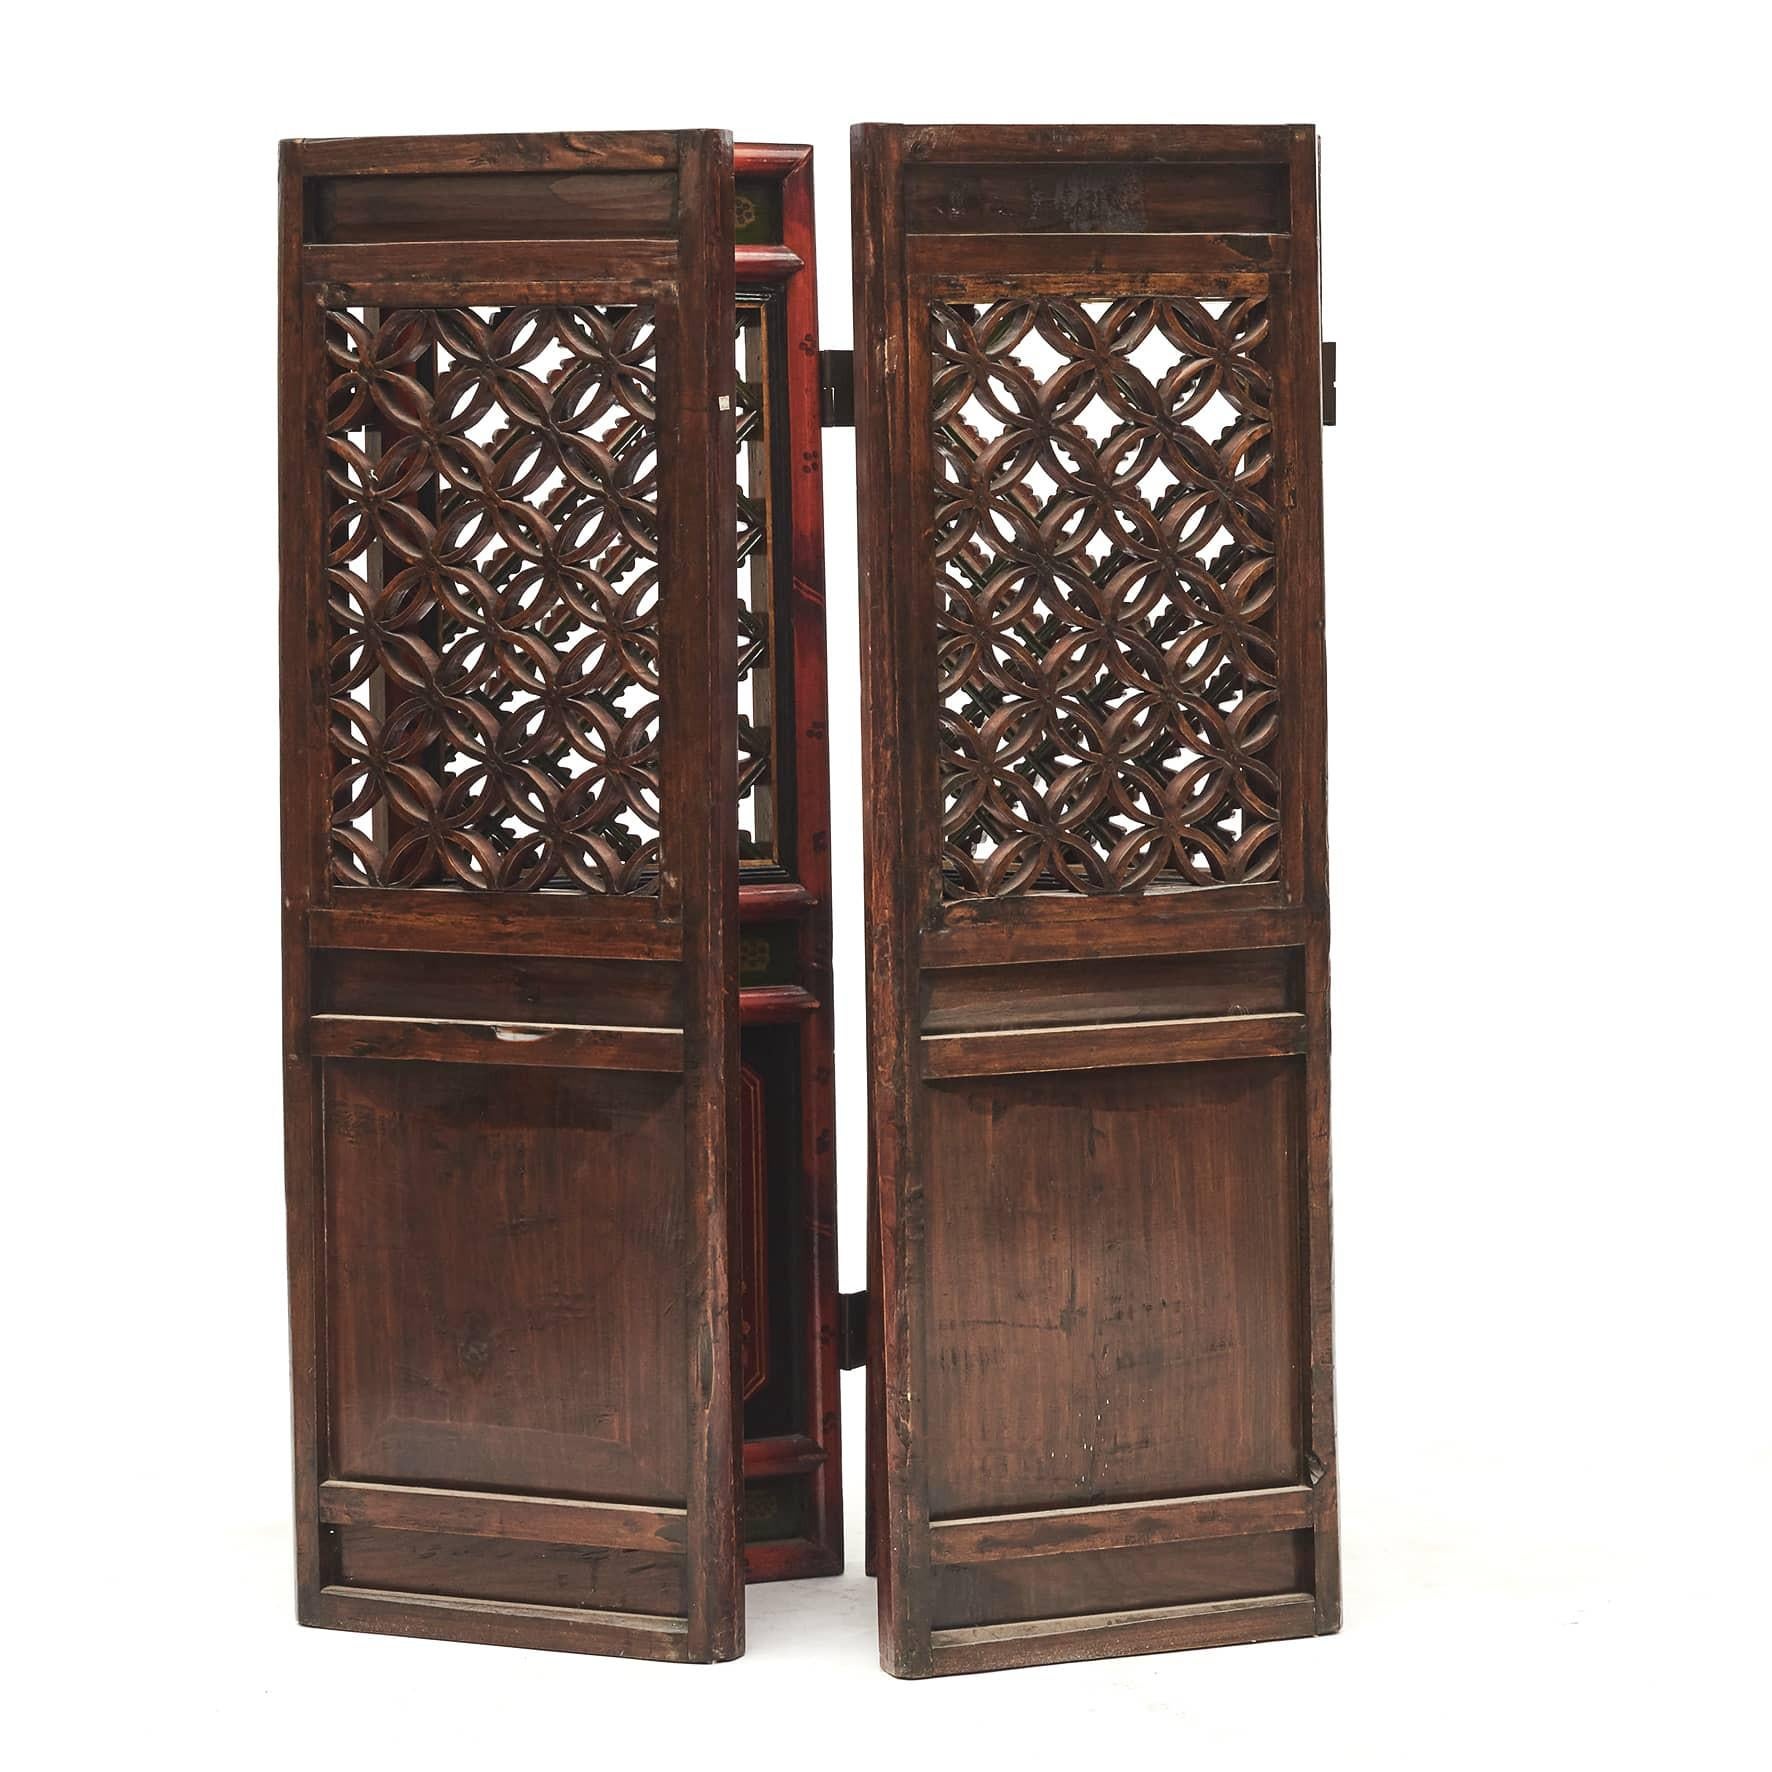 A Set Of 4 Screens / Room Dividers. c 1860 - 1880 For Sale 1